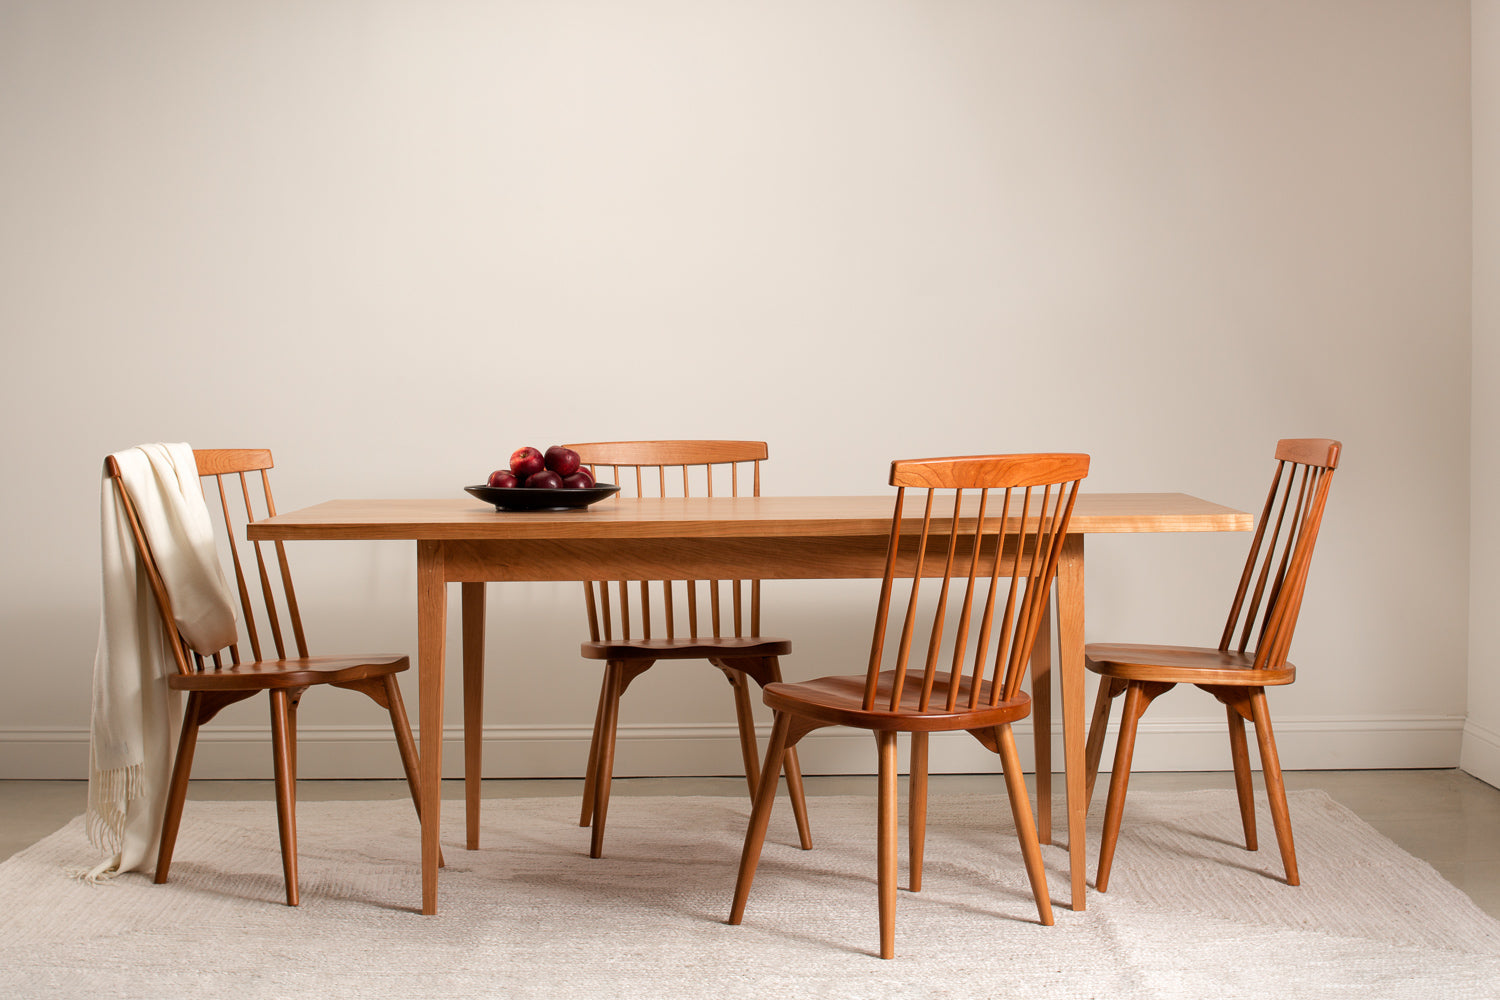 Solid wood Shaker dining table with spindle chairs.